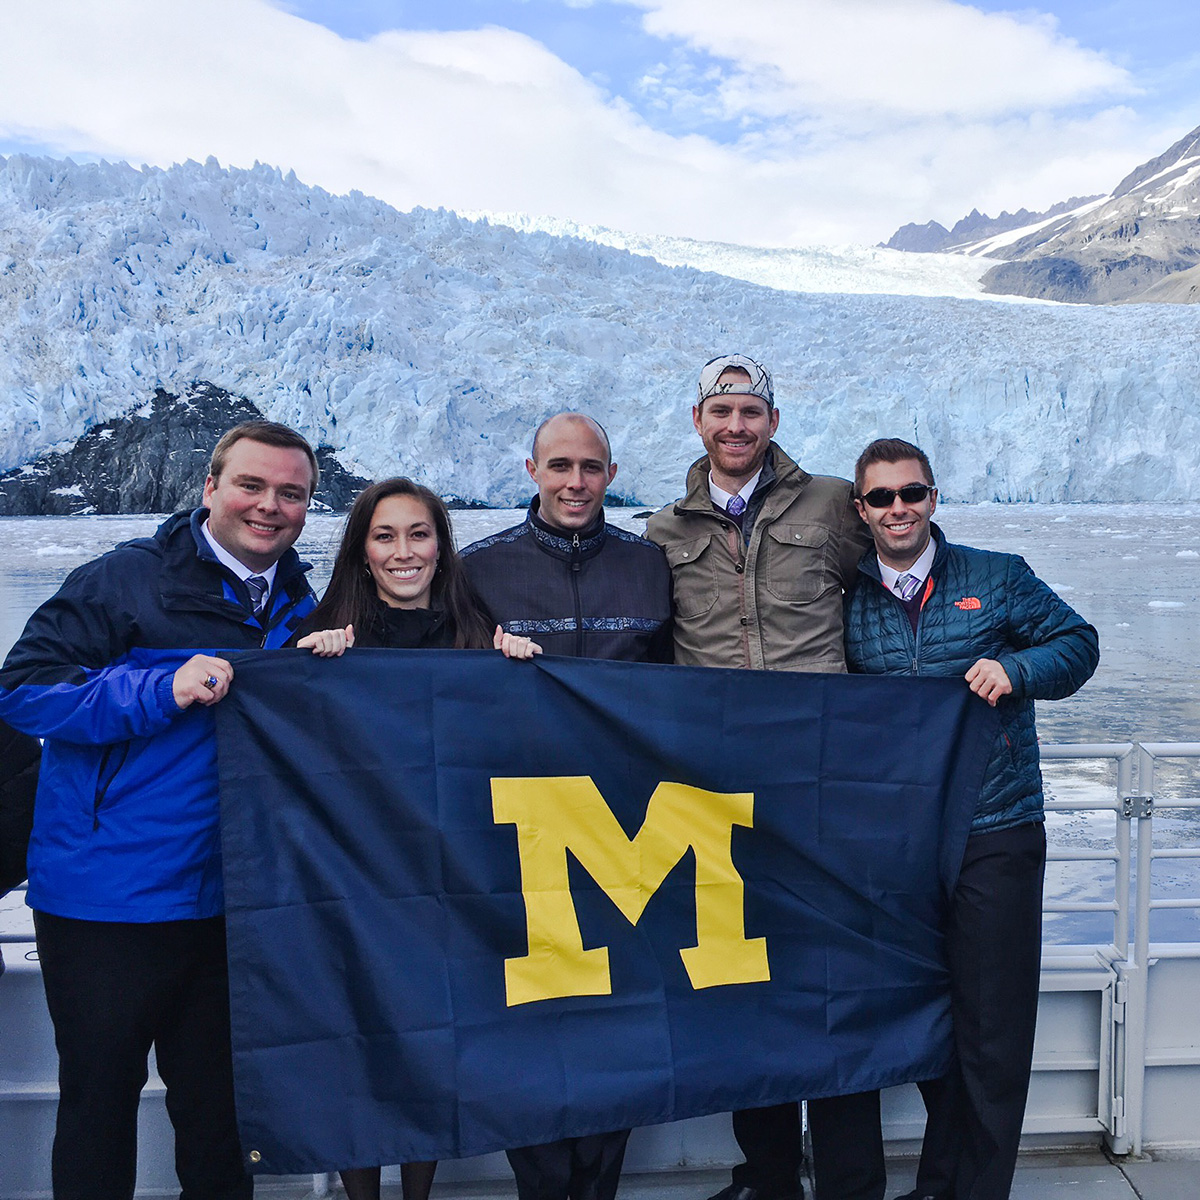 From Ann Arbor to Alaska, Brendan Klein, Kaylie Klein, Eric Schumm, Kevin Gillman (all class of ’09) and Andrew McArthur, ’08, MSE’10, never forget their Michigan pride. Photo of the Aialik Glacier at Kenai Fjords National Park.